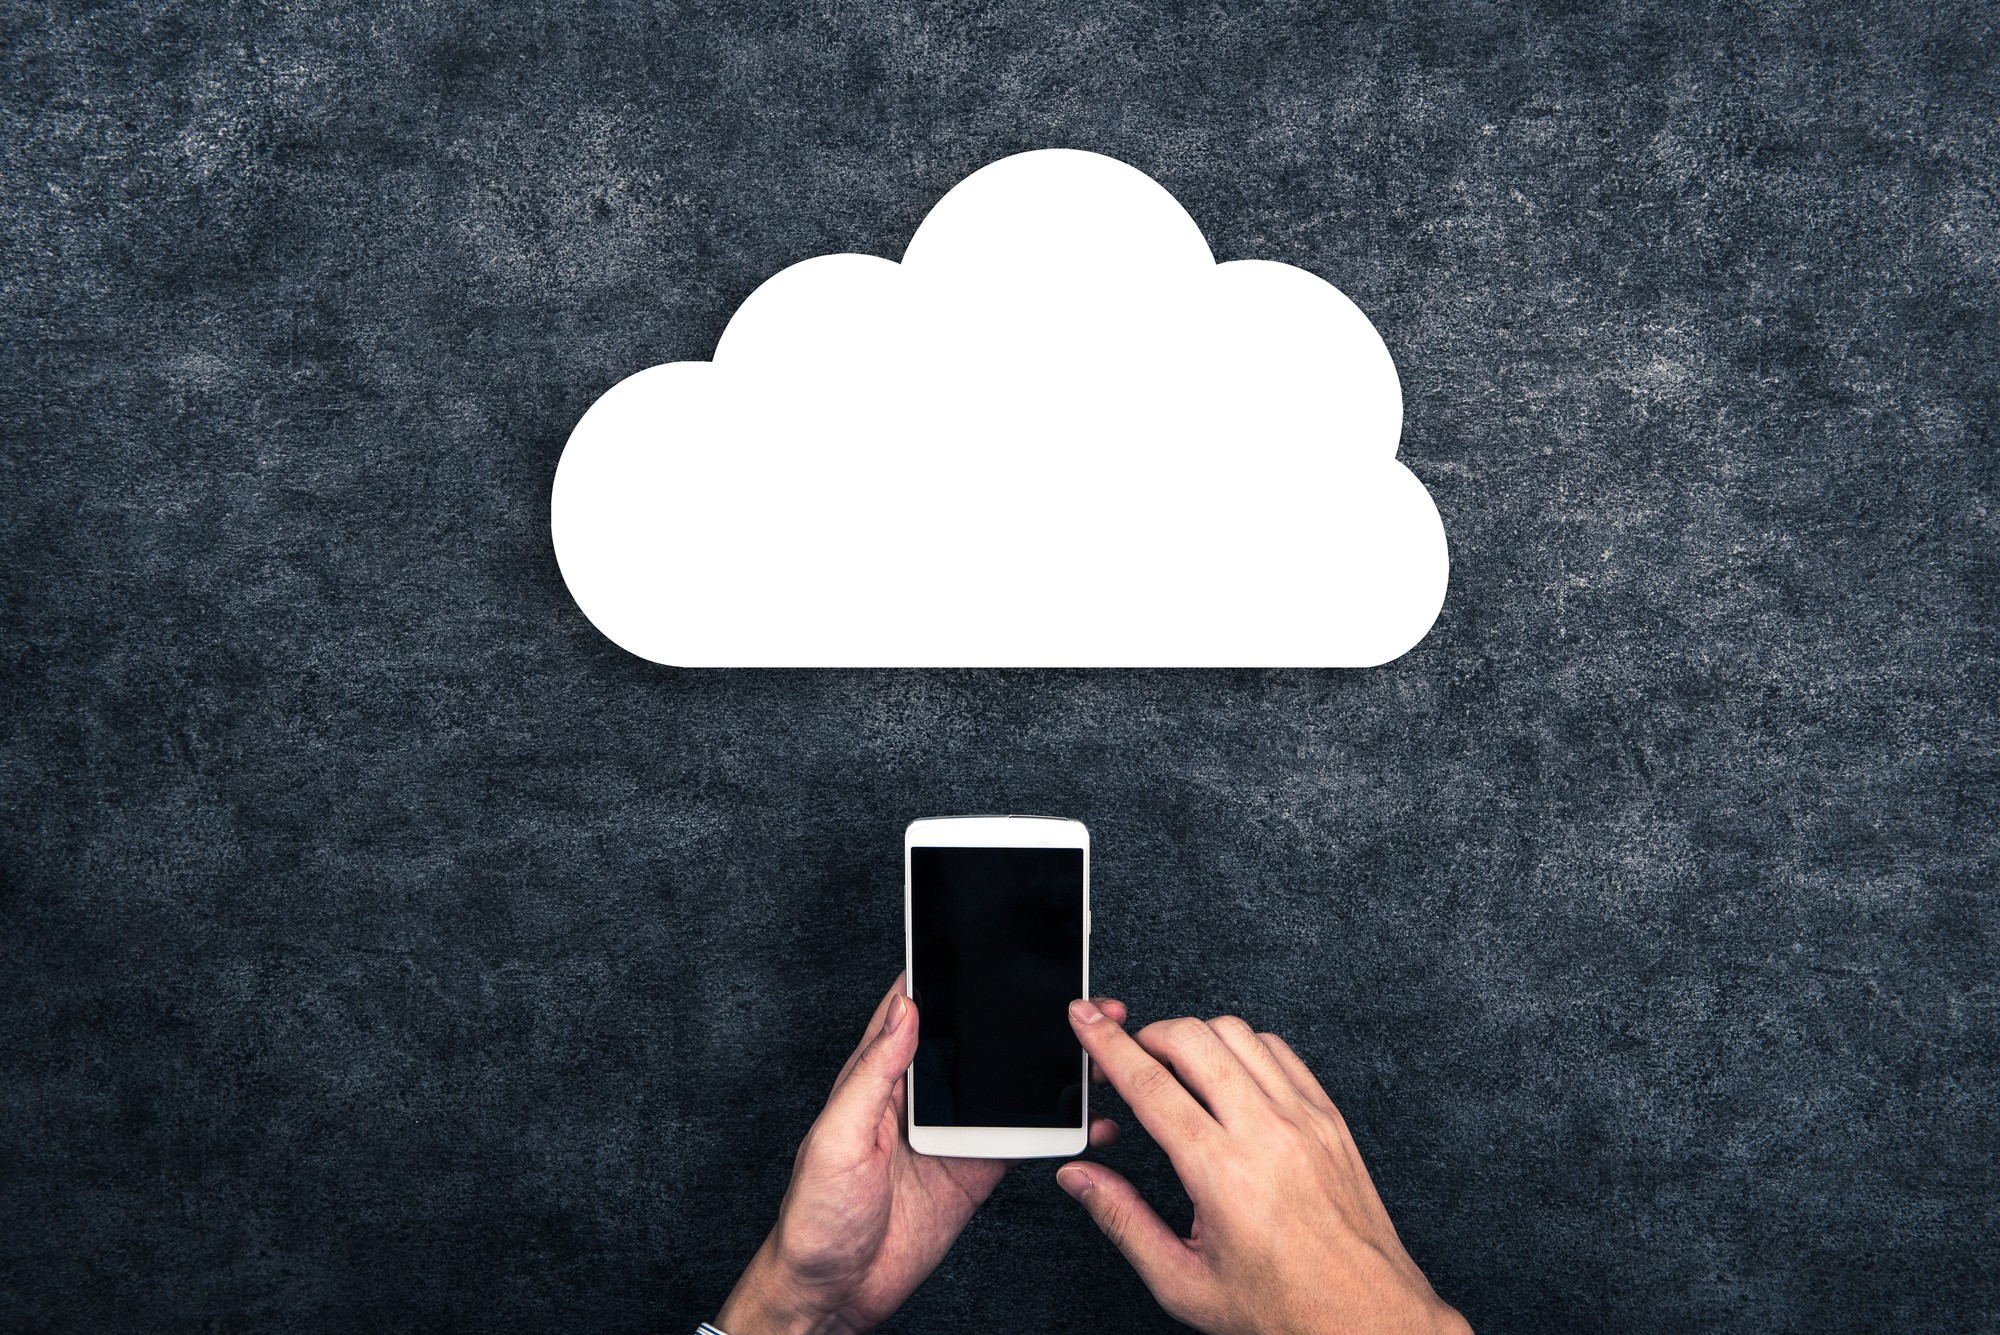 Learn about Cloud Telephony